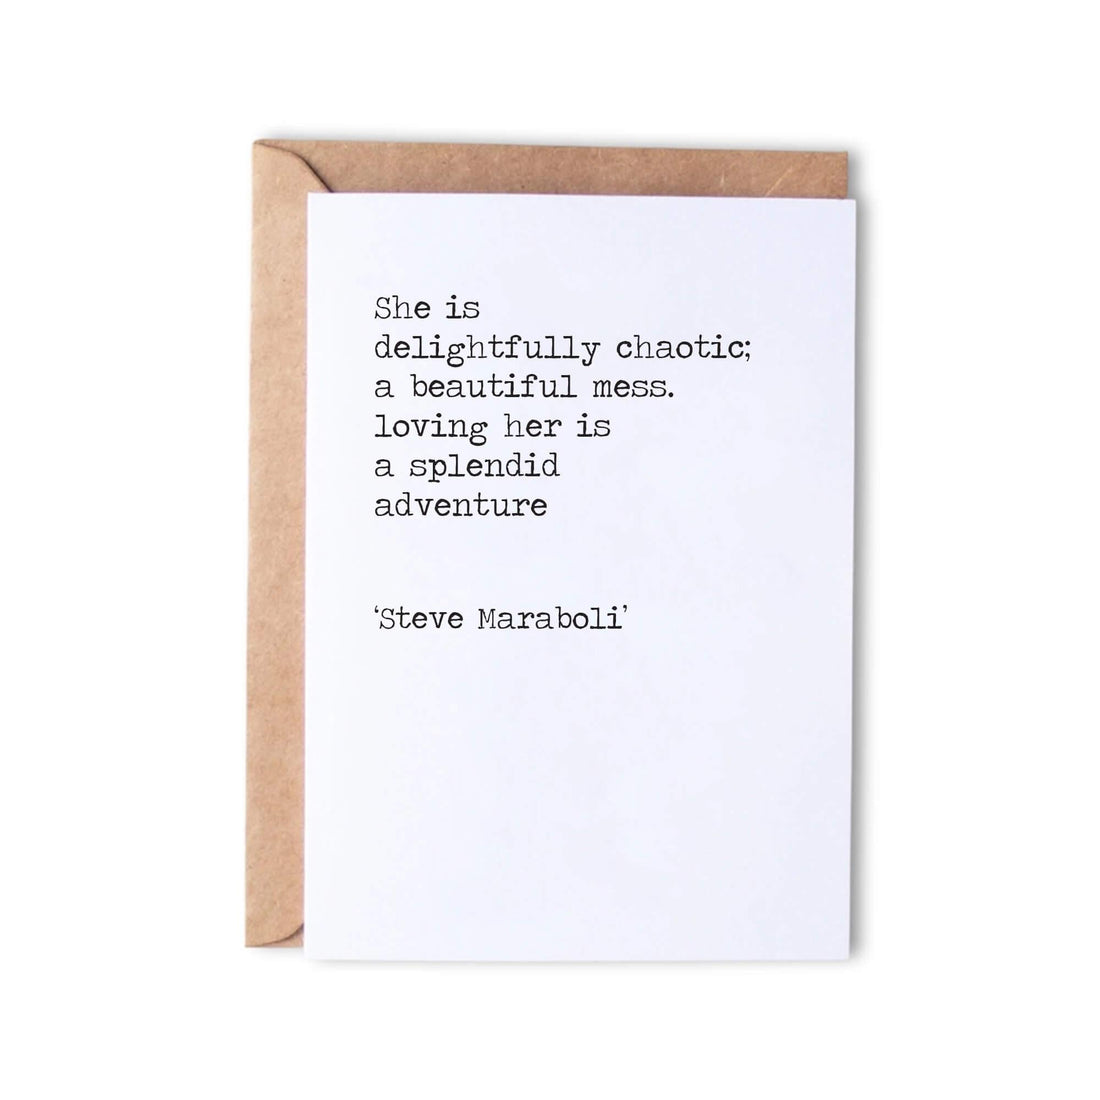 Delightfully chaotic - Monk Designs